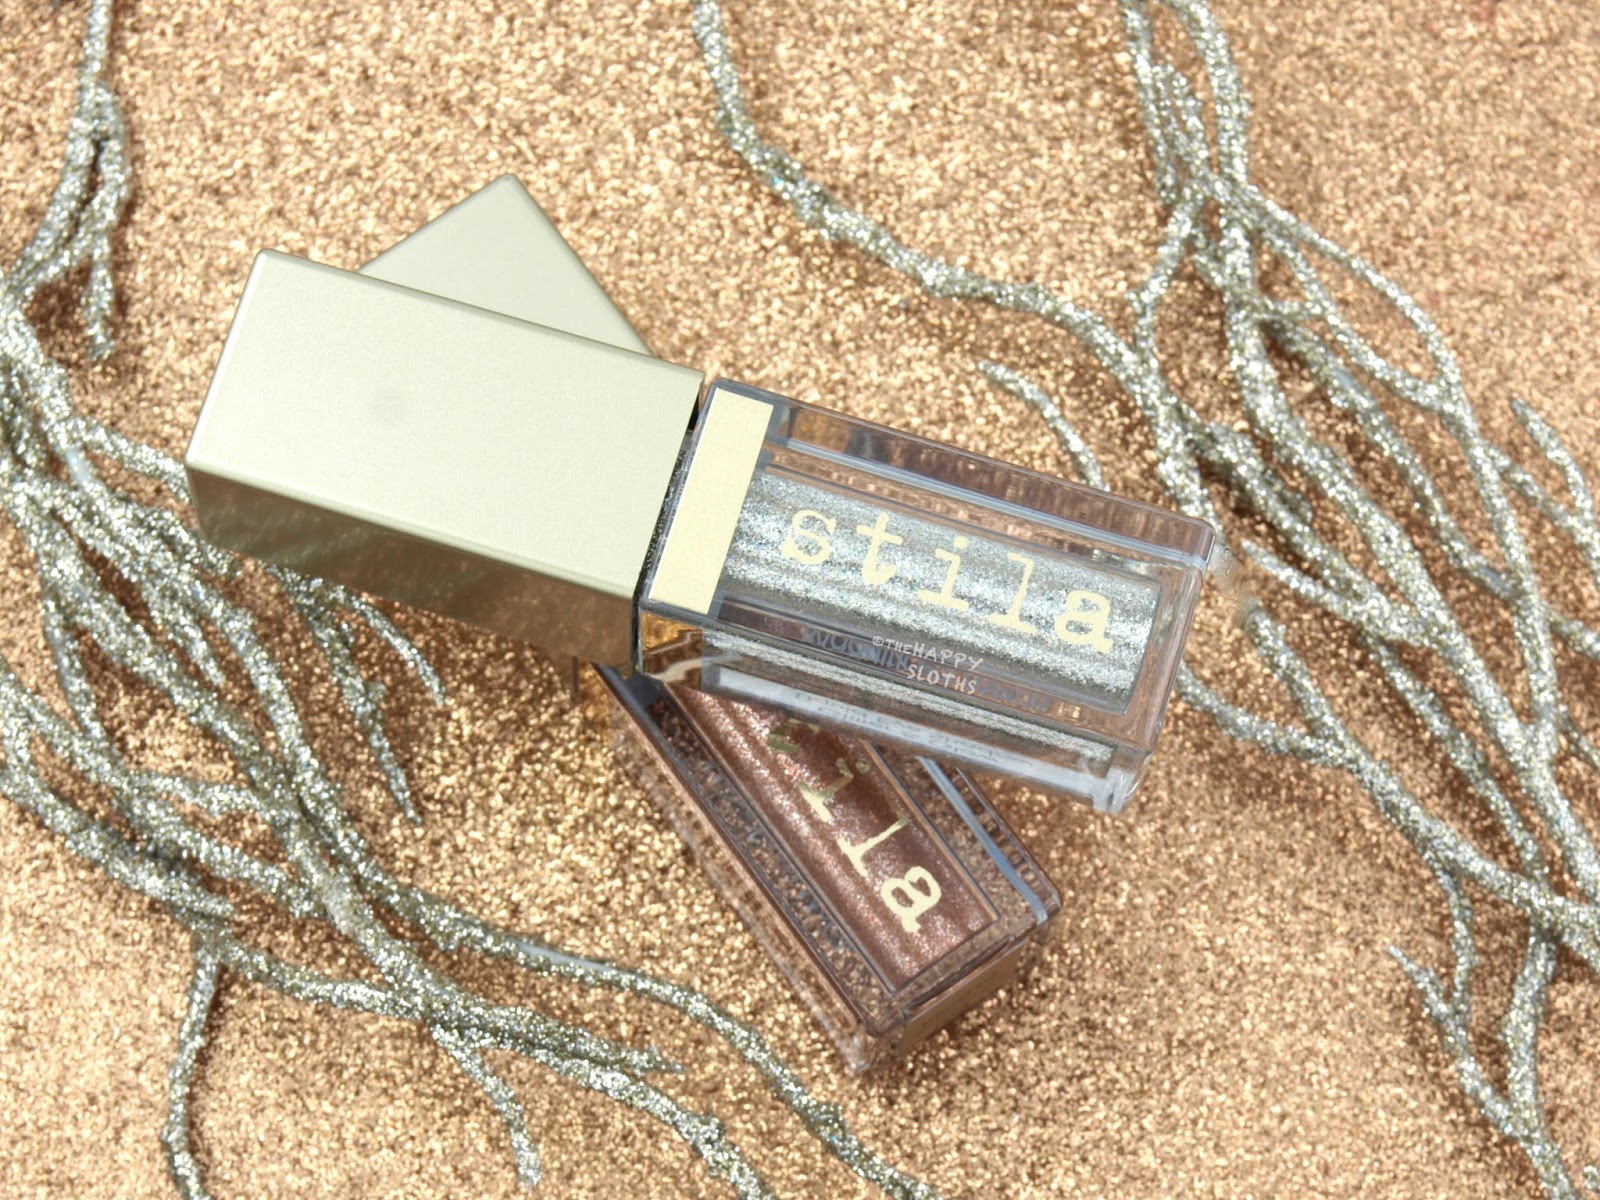 Stila Magnificent Metals Glitter & Glow Liquid Eye Shadow in "Bronzed Bell" & "Diamond Dust": Review and Swatches